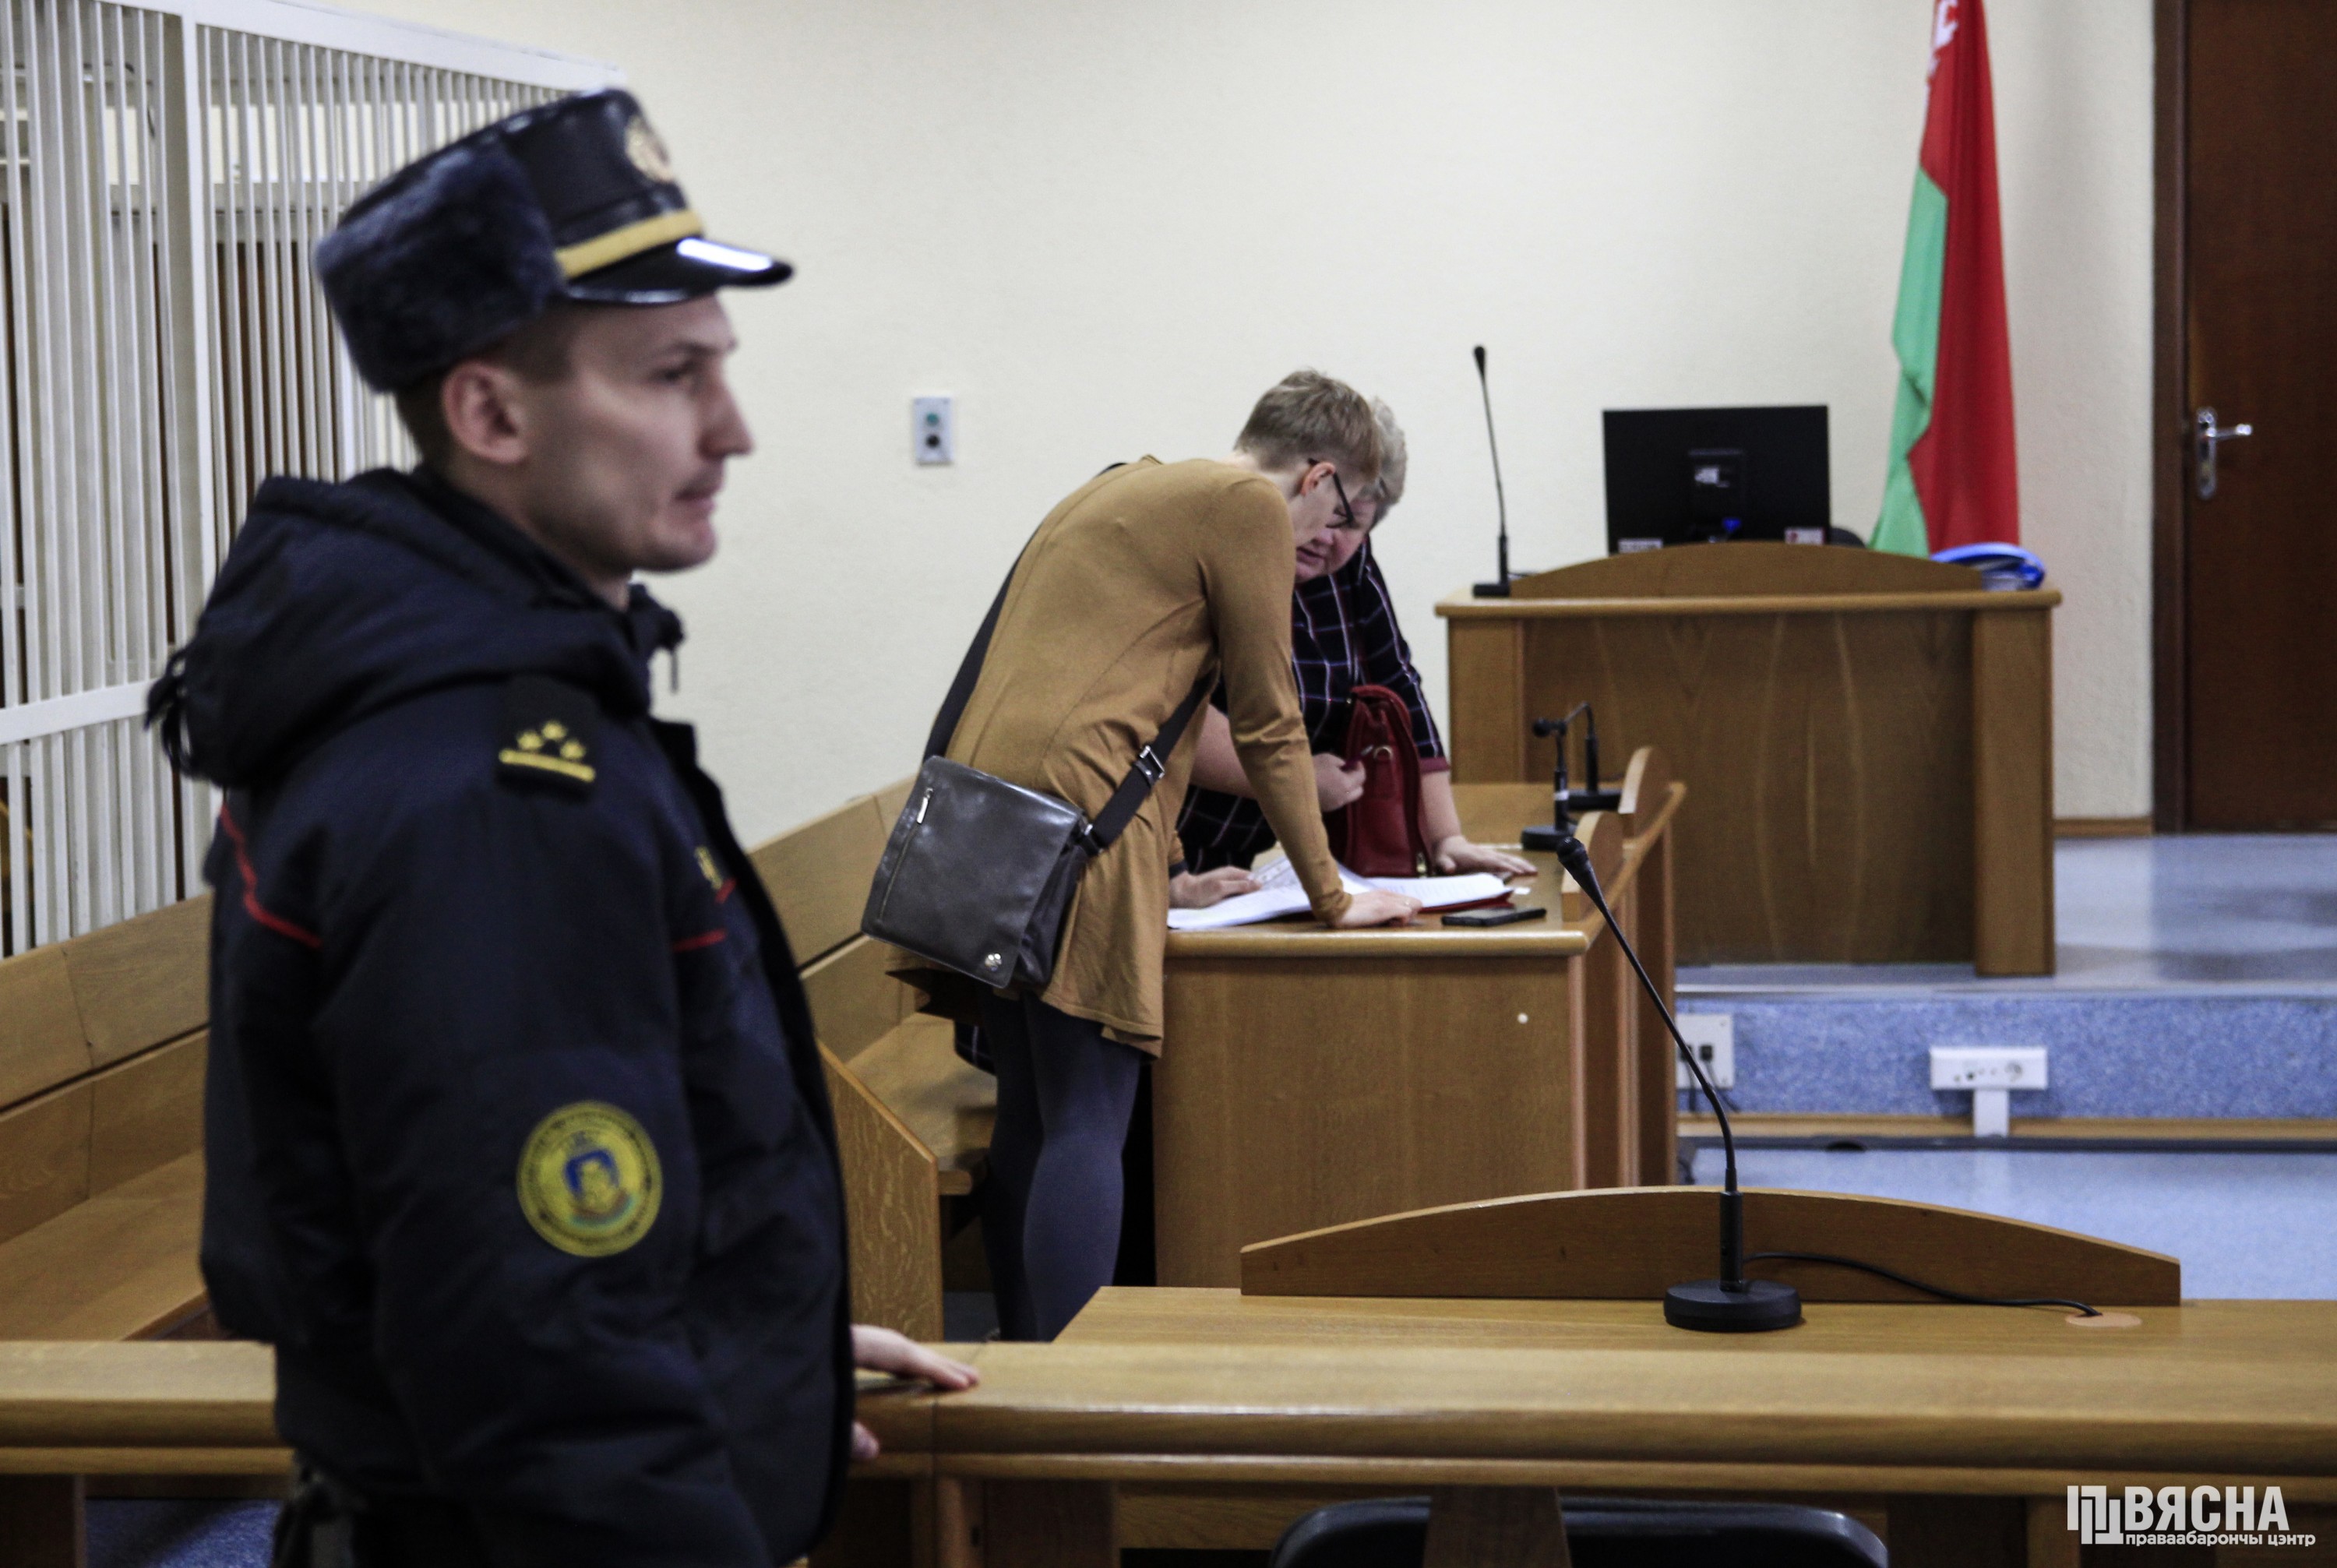 Maryna Zolatava with her counselor in court. Photo by Viasna HRC